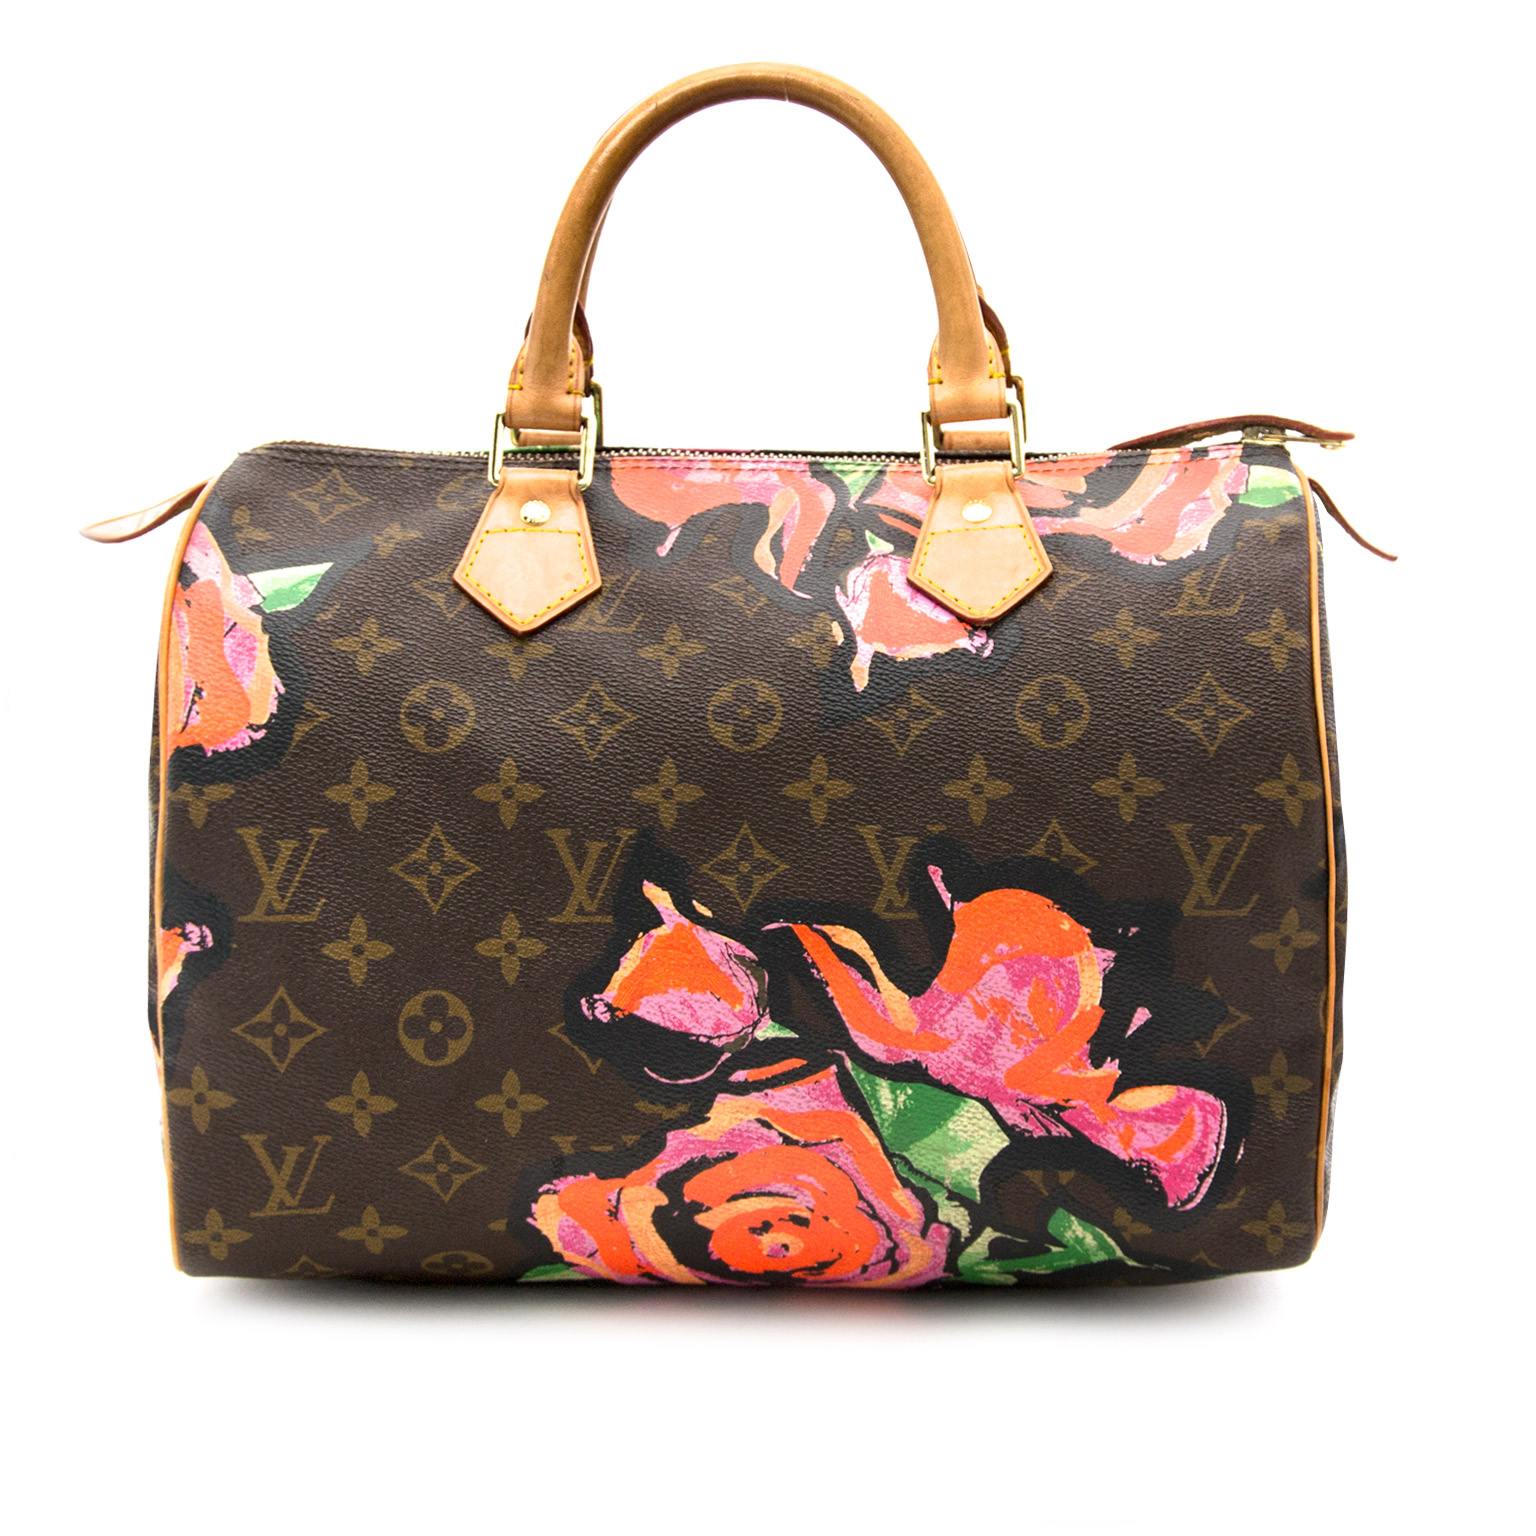 Louis Vuitton Speedy 30 Limited Edition Roses Bag